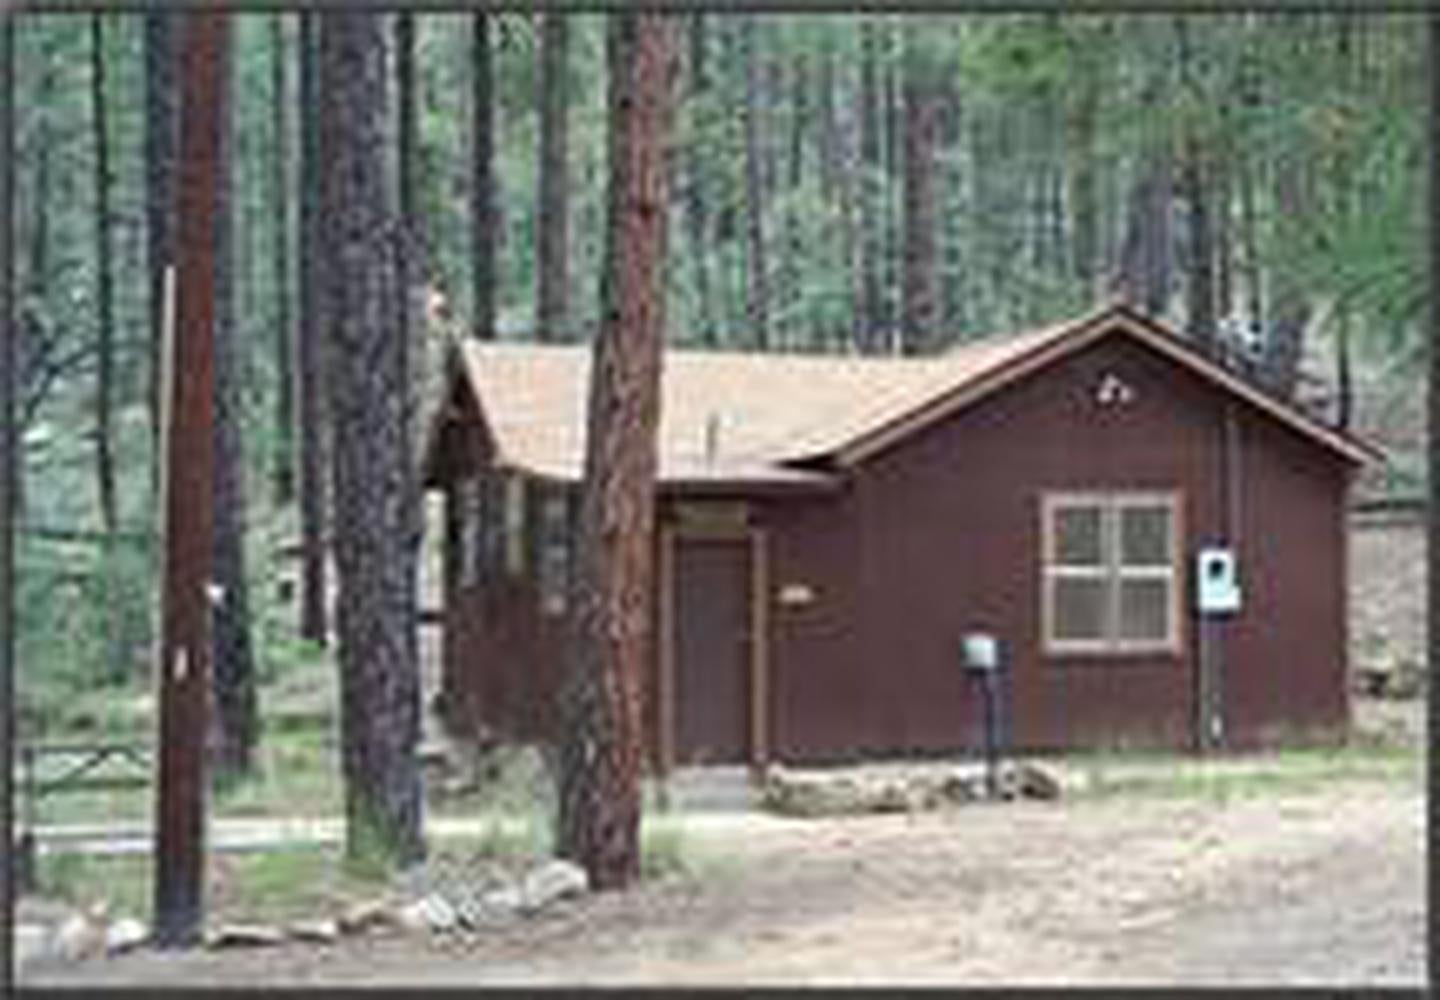 Exterior of Horsethief cabin sitting in the ponderosa with picnic table to the left



Horsethief cabin

Credit: US Forest Service